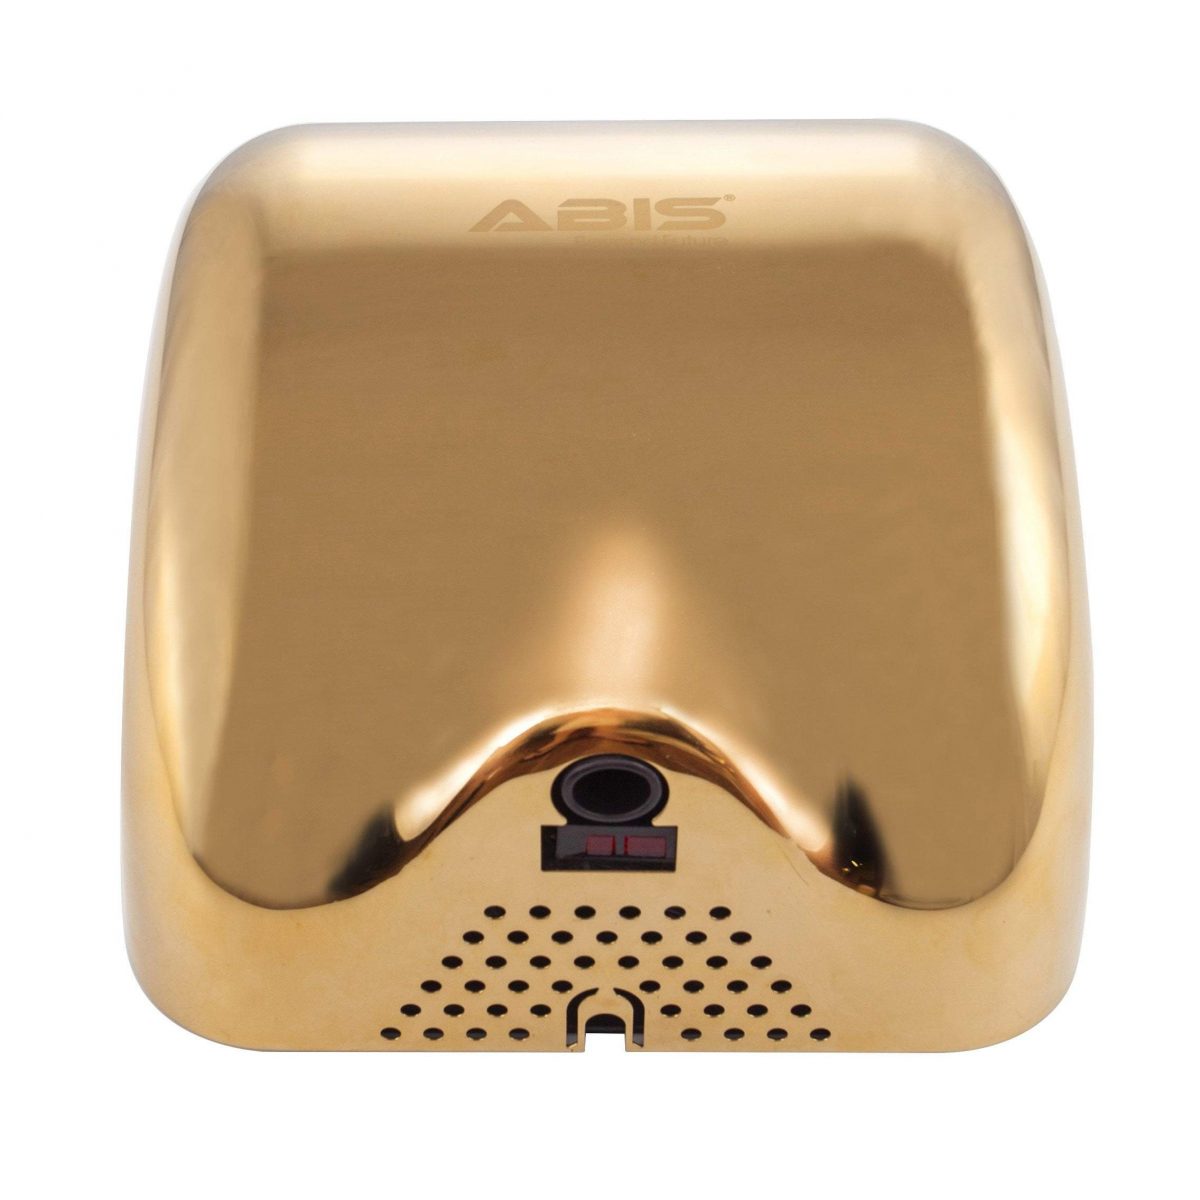 Excel-9 Stainless Steel Commercial Hand Dryer - Gold - ABIS